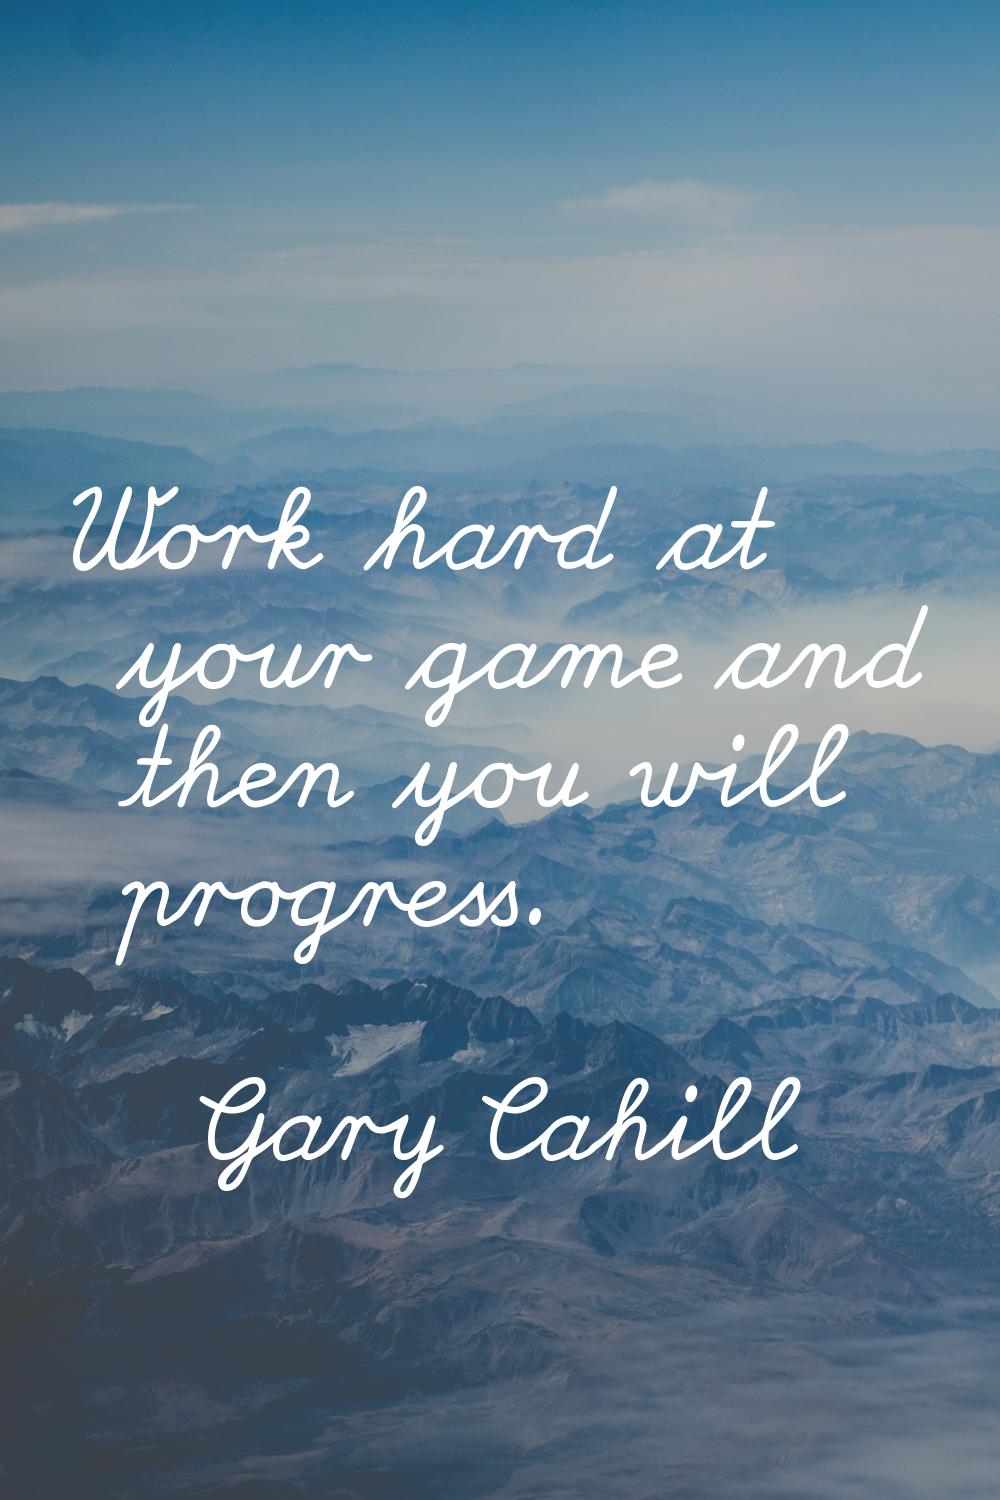 Work hard at your game and then you will progress.